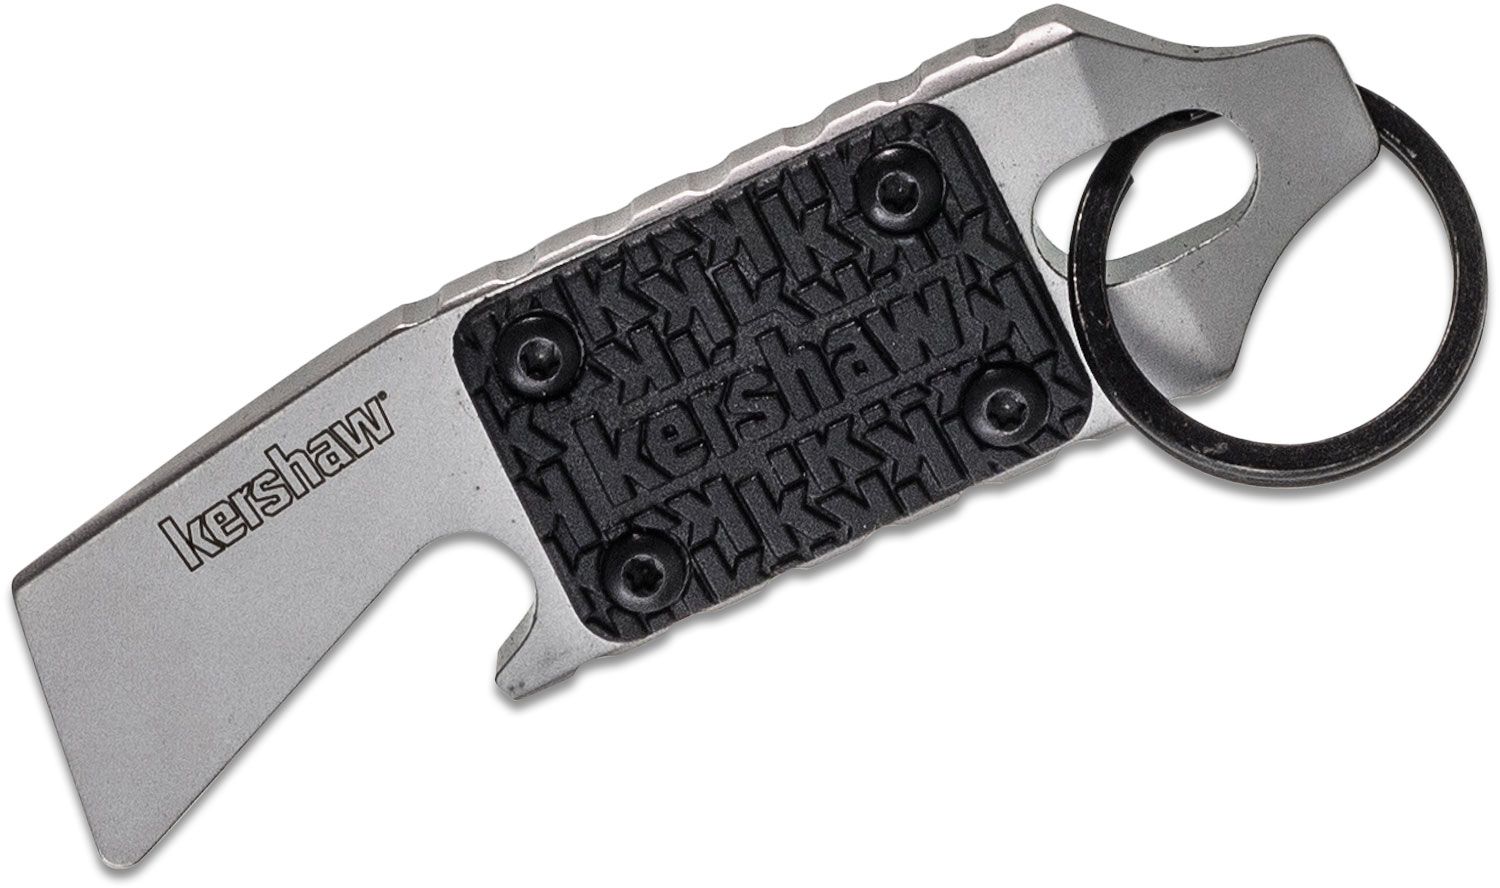 Kershaw Pt-2 Compact Keychain Pry Tool 8810X Made of 8cr13mov Stainless Steel for sale online 